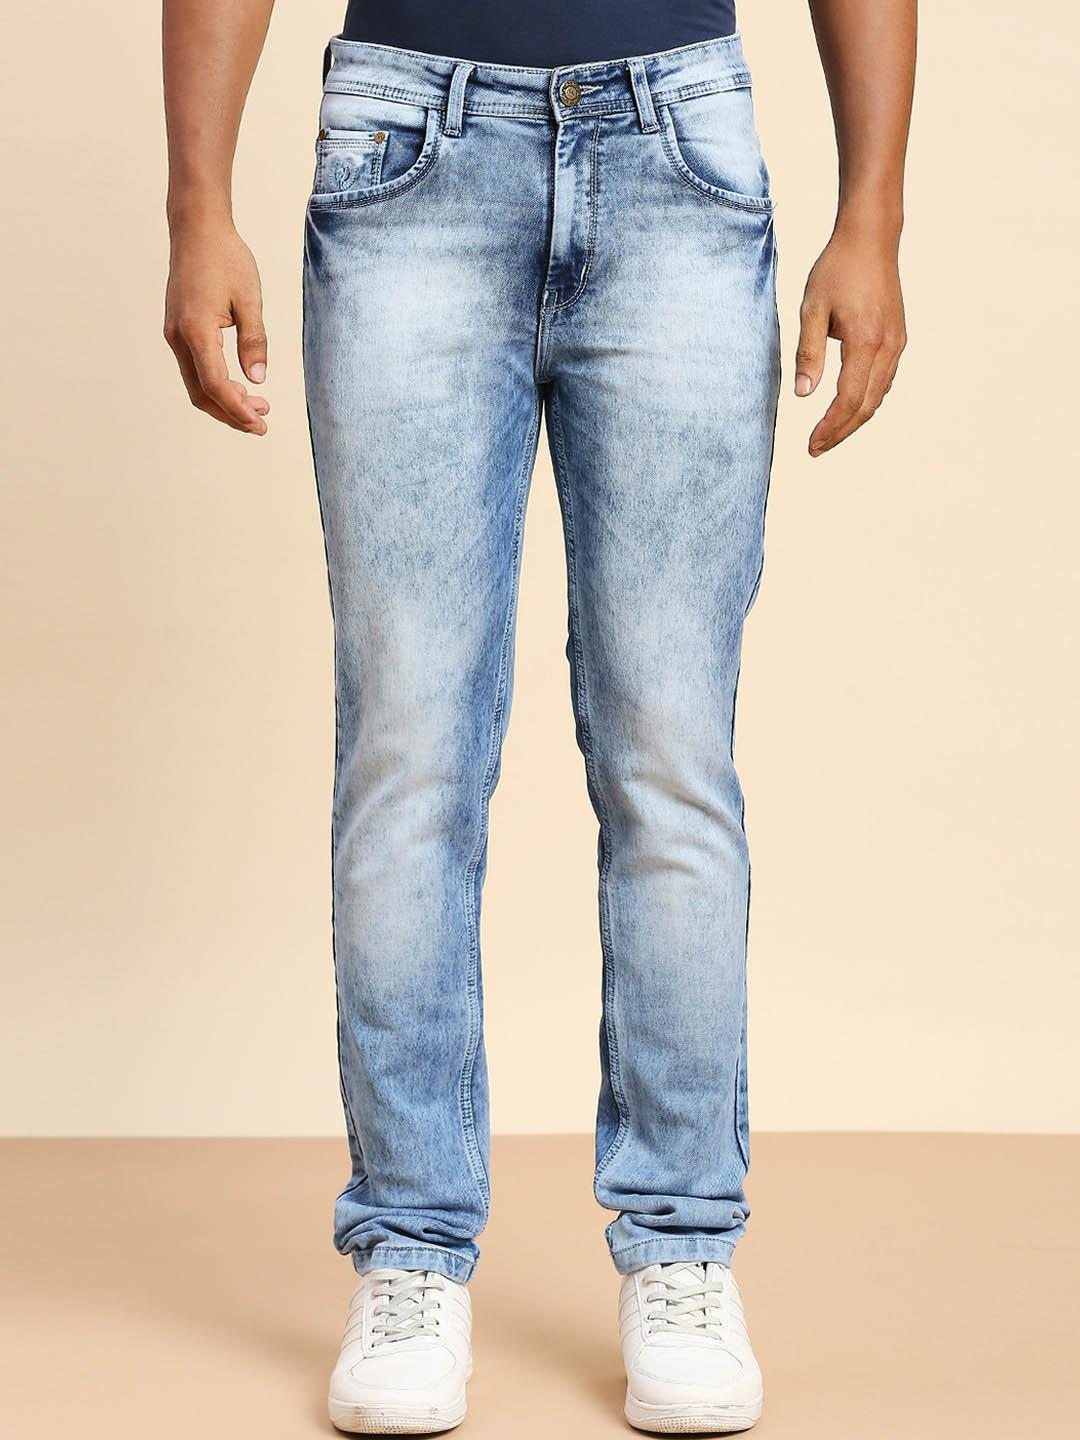 hj hasasi men straight fit high-rise heavy fade jeans